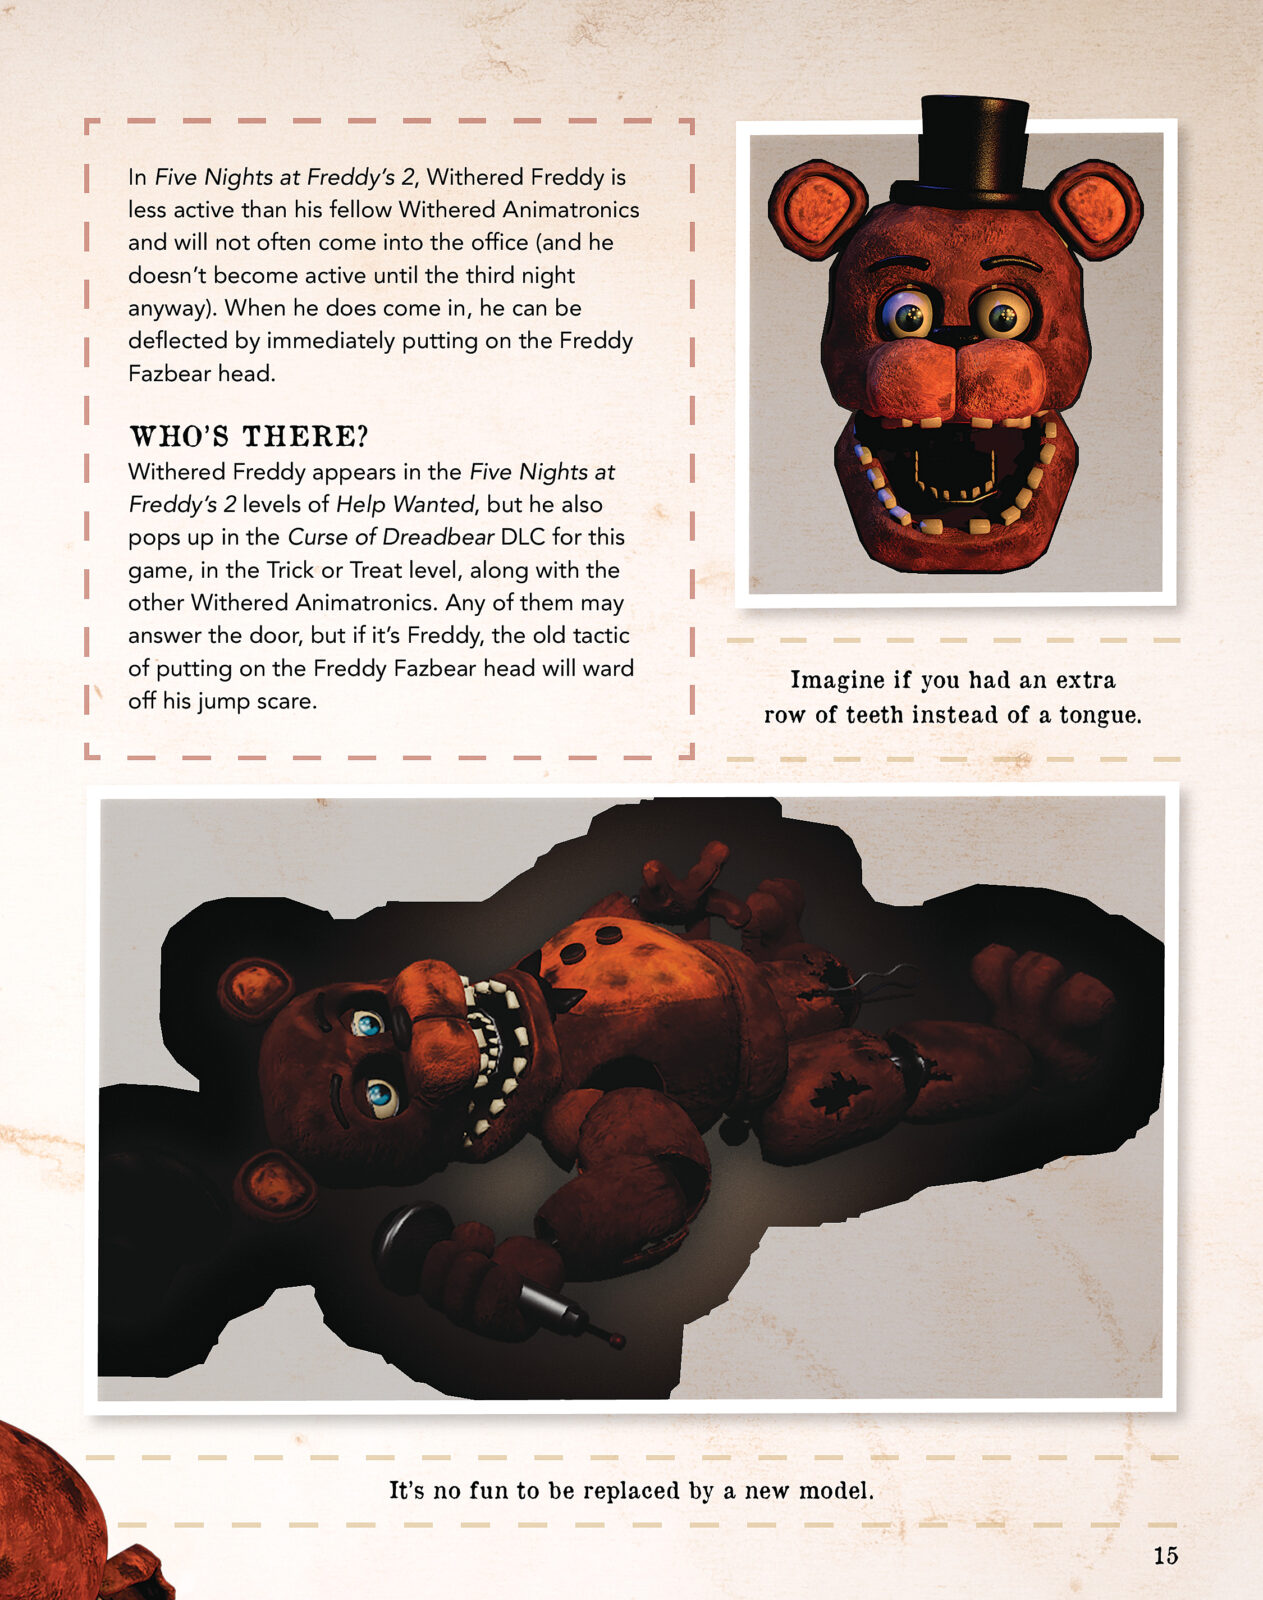 Five Nights at Freddy's Character Encyclopedia by Scott Cawthon